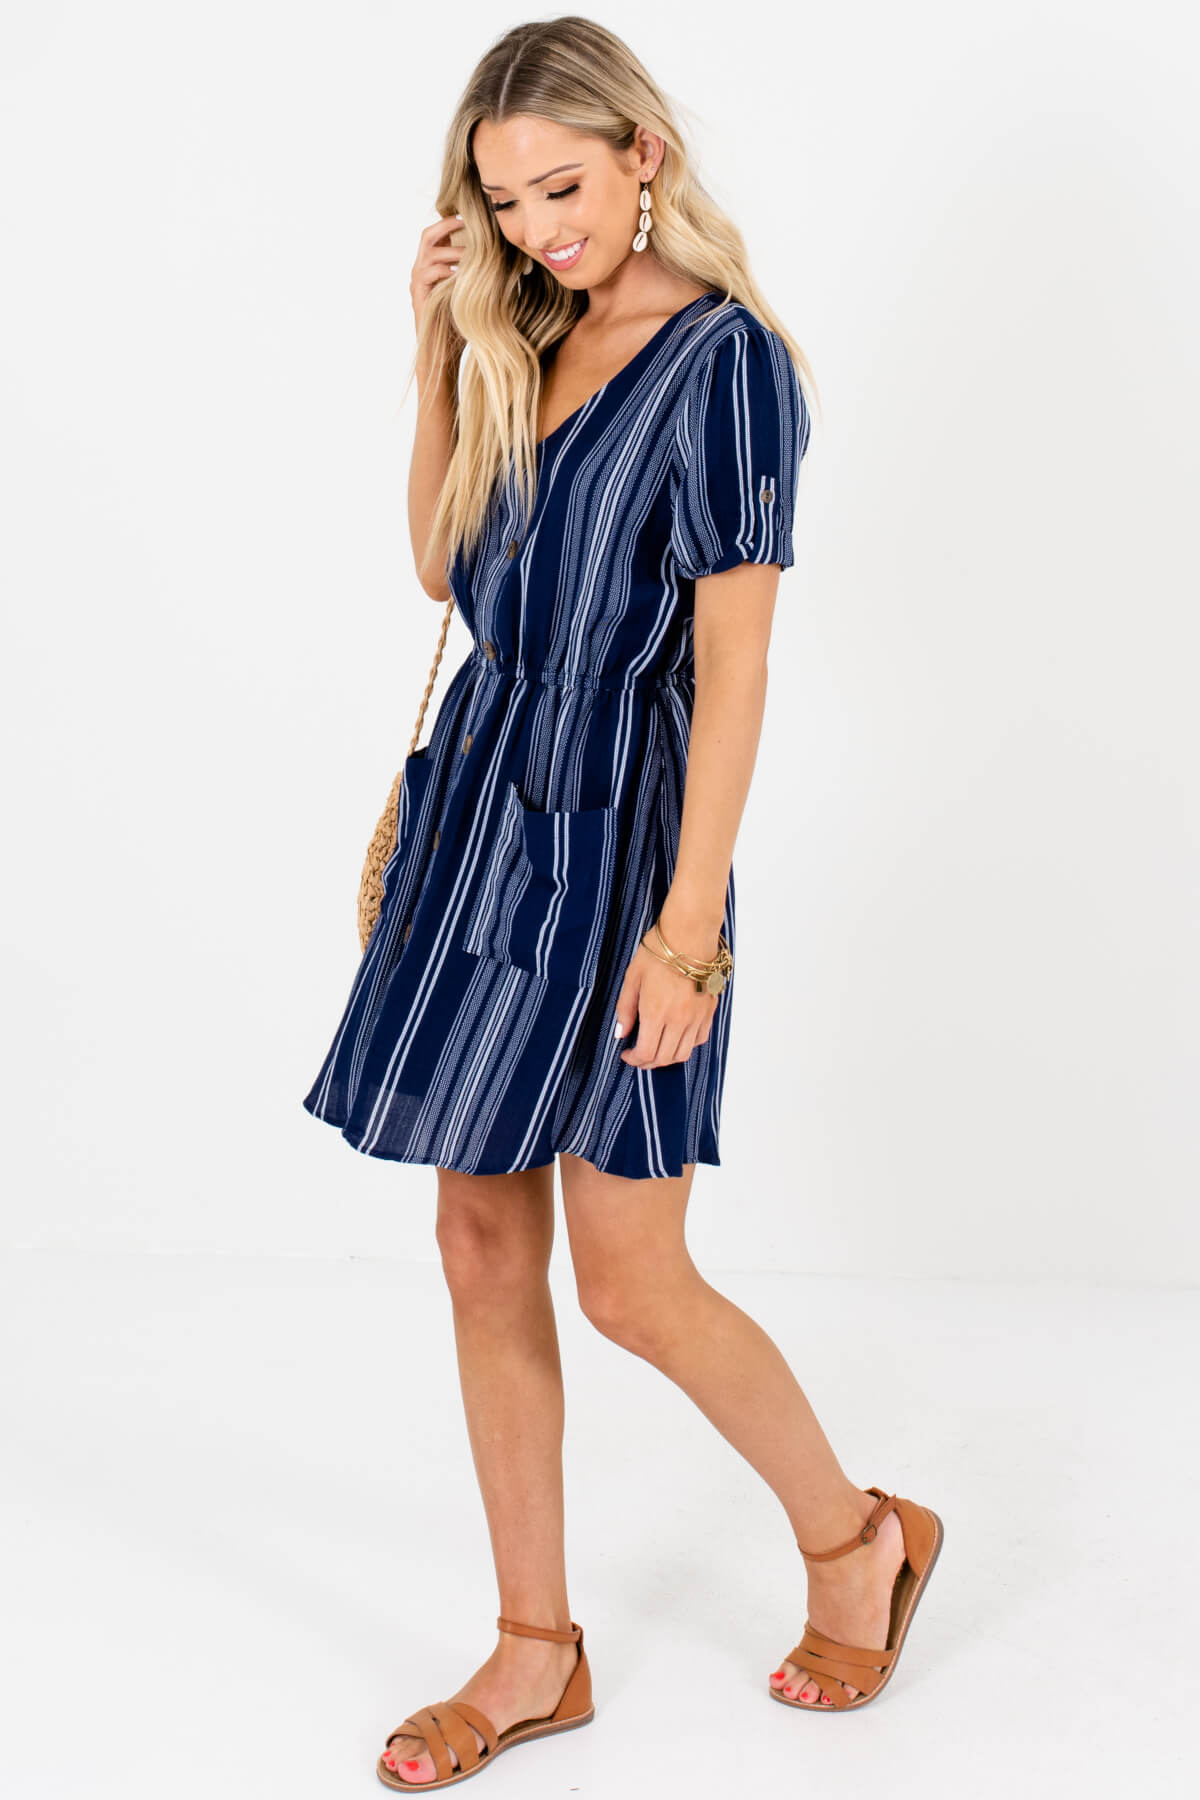 Navy Blue White Striped Boutique Mini Dresses for Summer